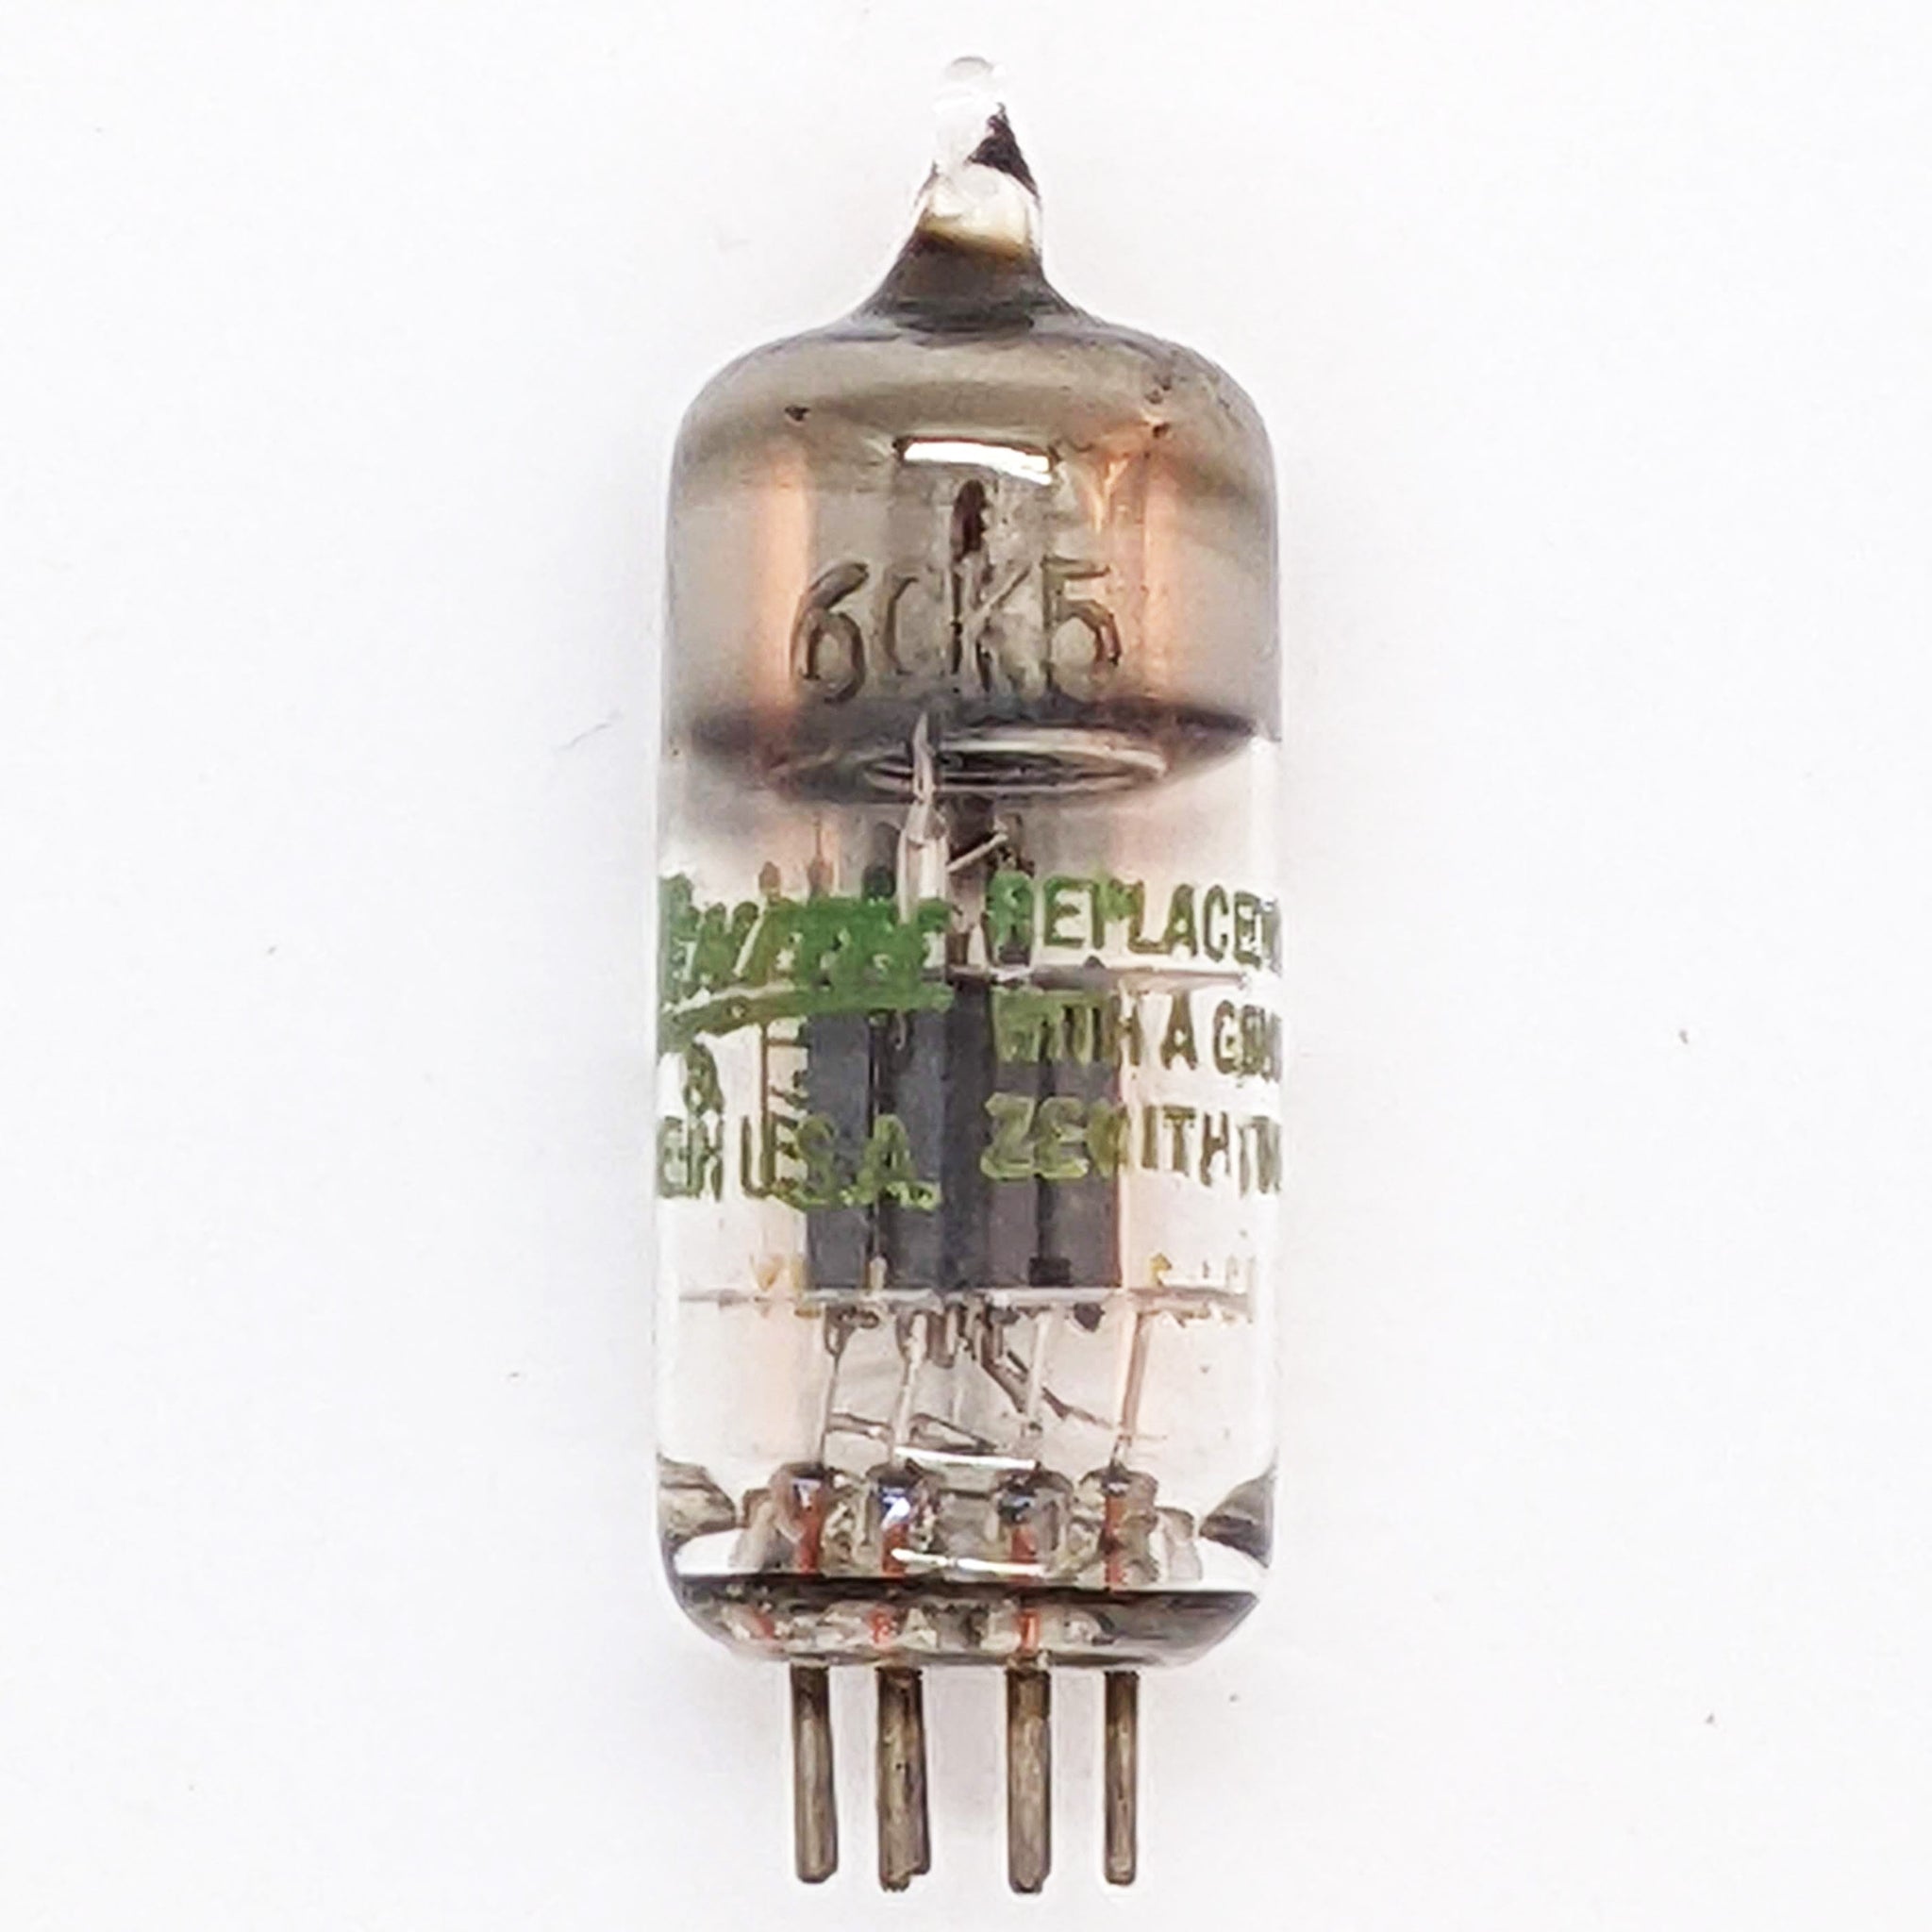 6GK5 Vacuum Tube, Tested Good, Ships Quick From Mississippi